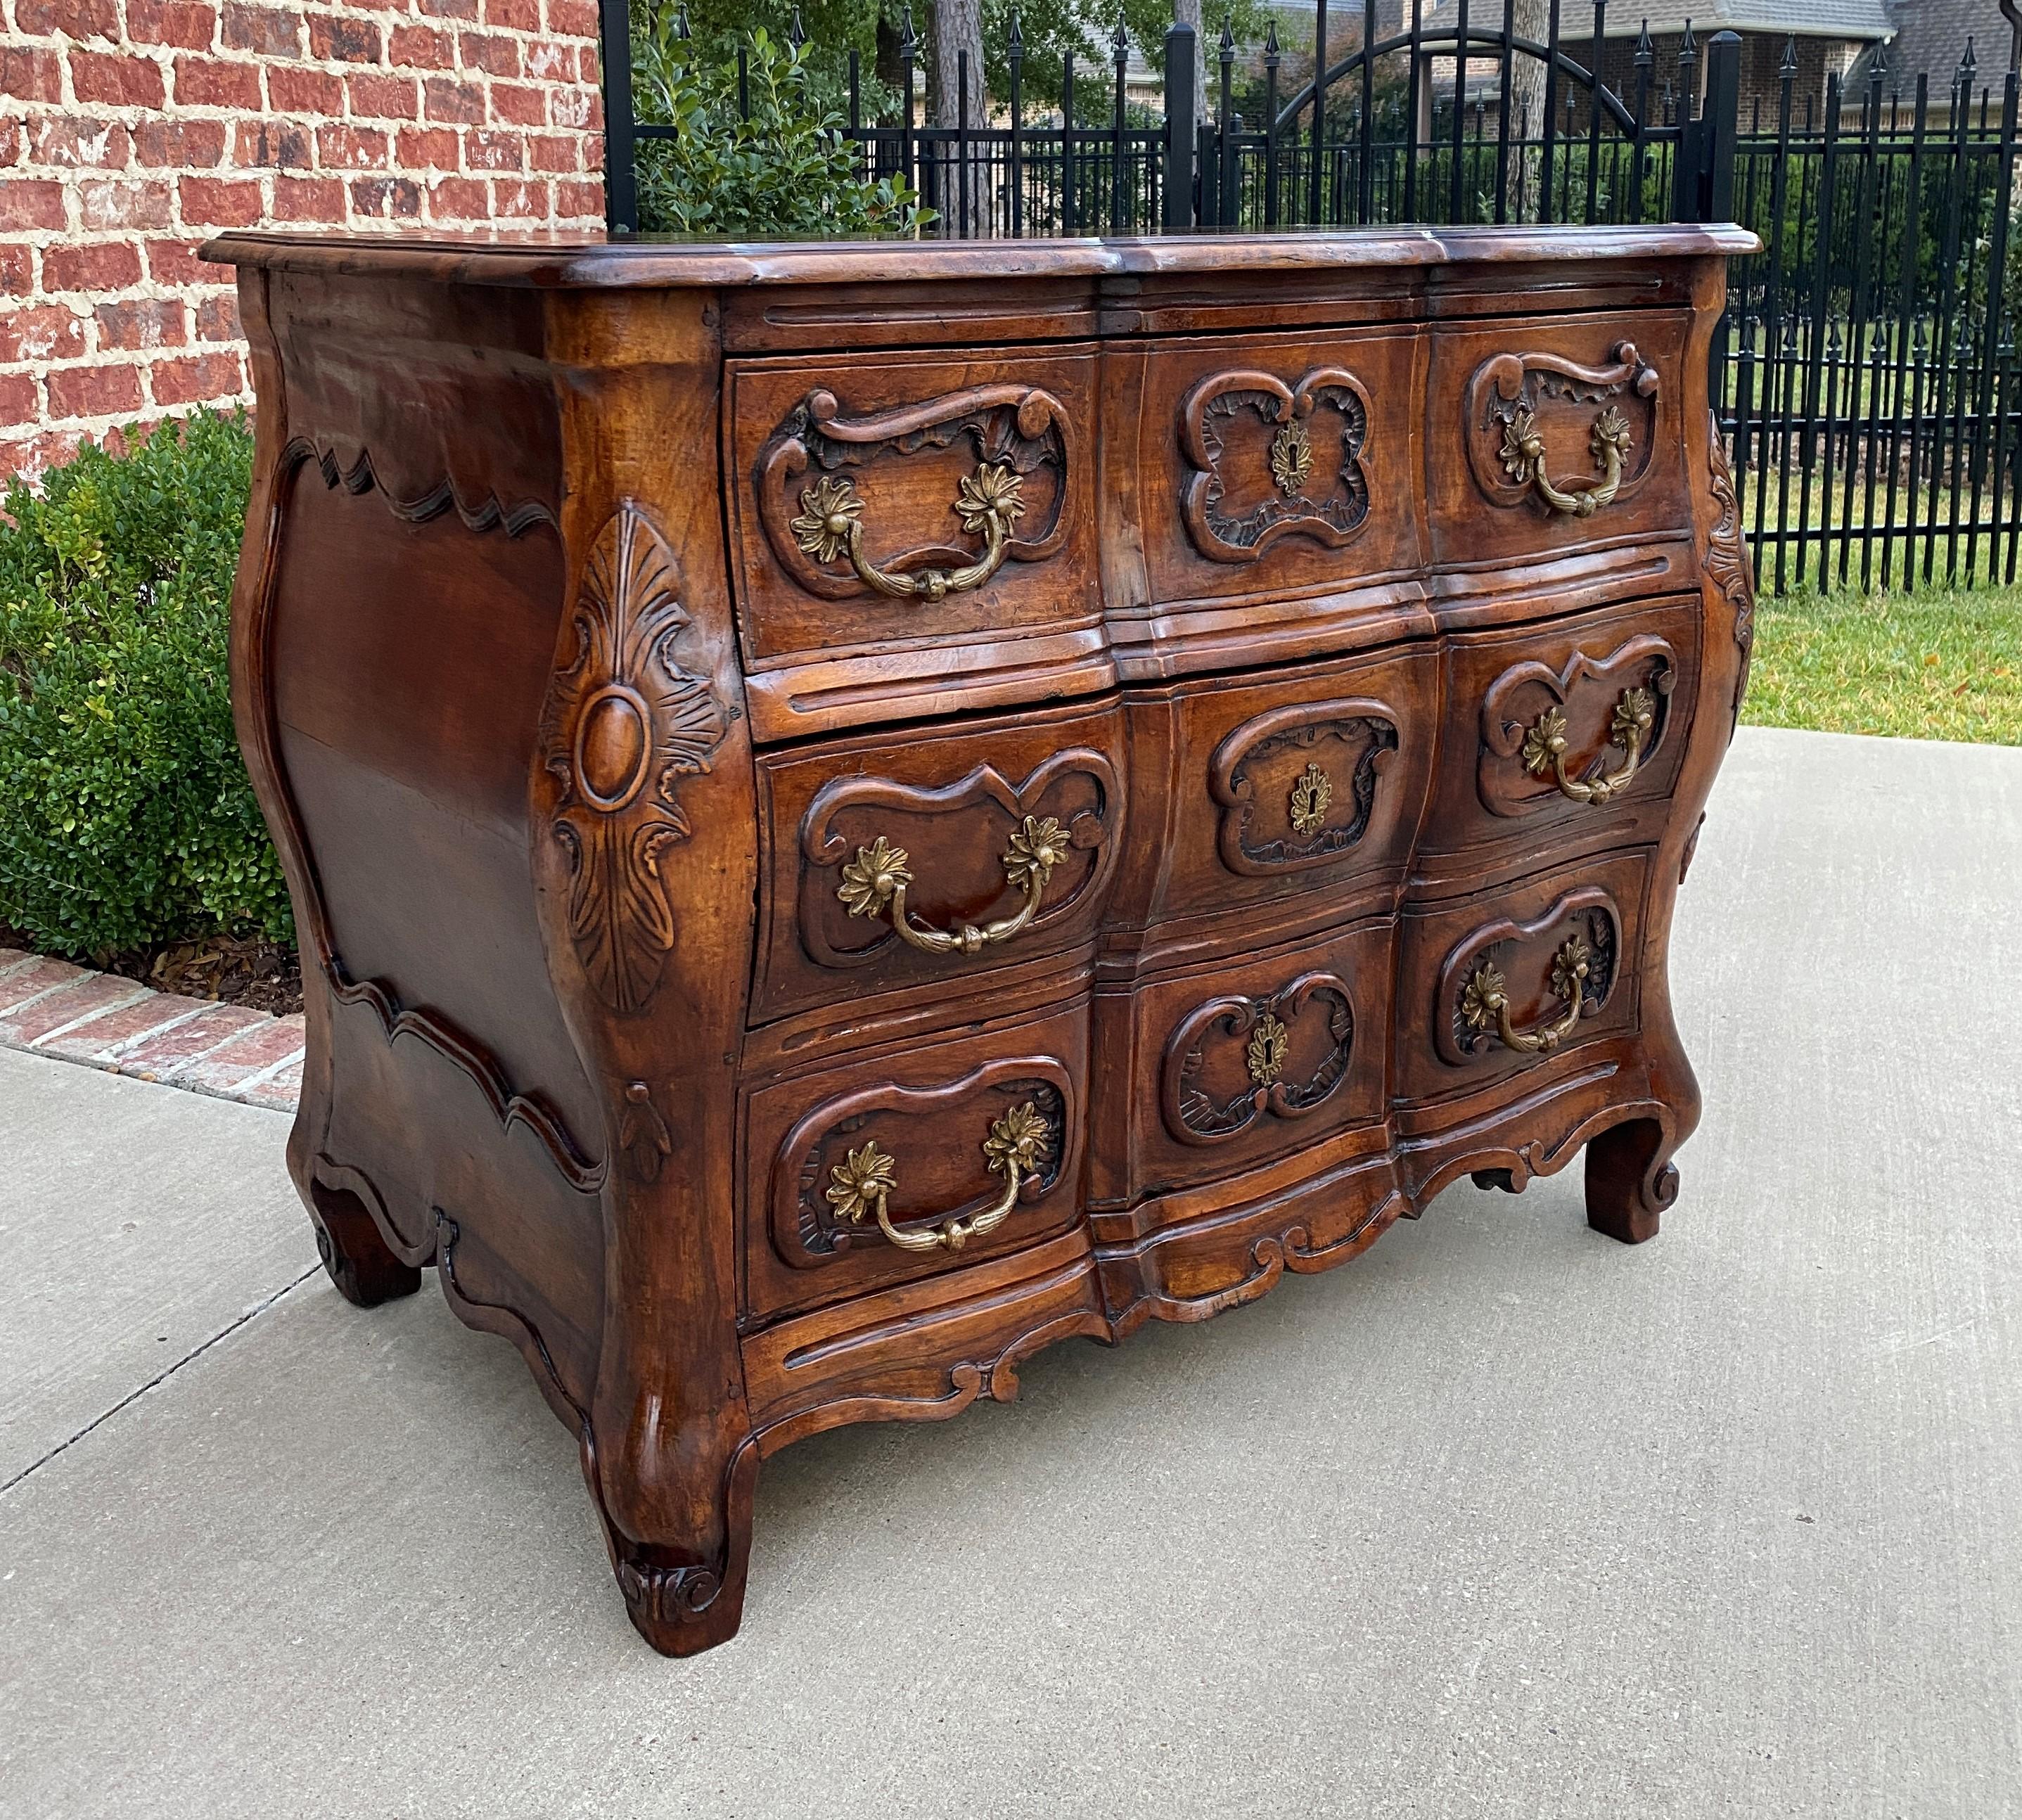 Exquisite antique French walnut 18th century Louis XV style bombe chest of drawers or commode

 This is a gorgeous example of an antique French walnut bombe style chest of drawers or commode with cabriole legs~~highly carved with serpentine shaped